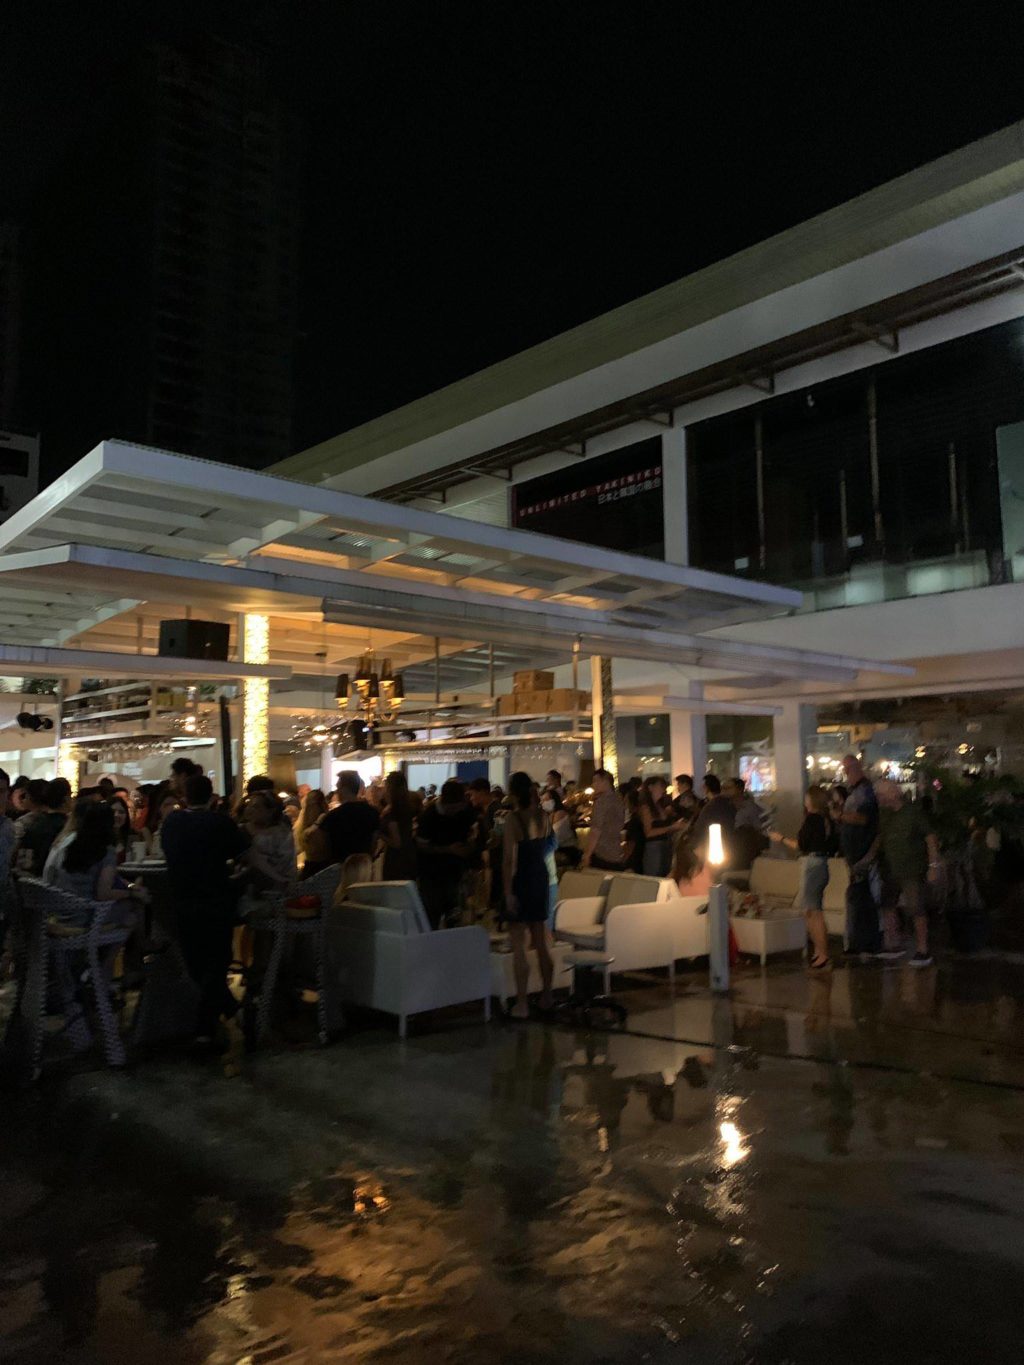 The BPLO issues a show cause order against the owner of a bar in Barangay Kasambagan, Cebu City that failed to practice social distancing and disregarded health protocols on Saturday, June 5. | Contributed photo